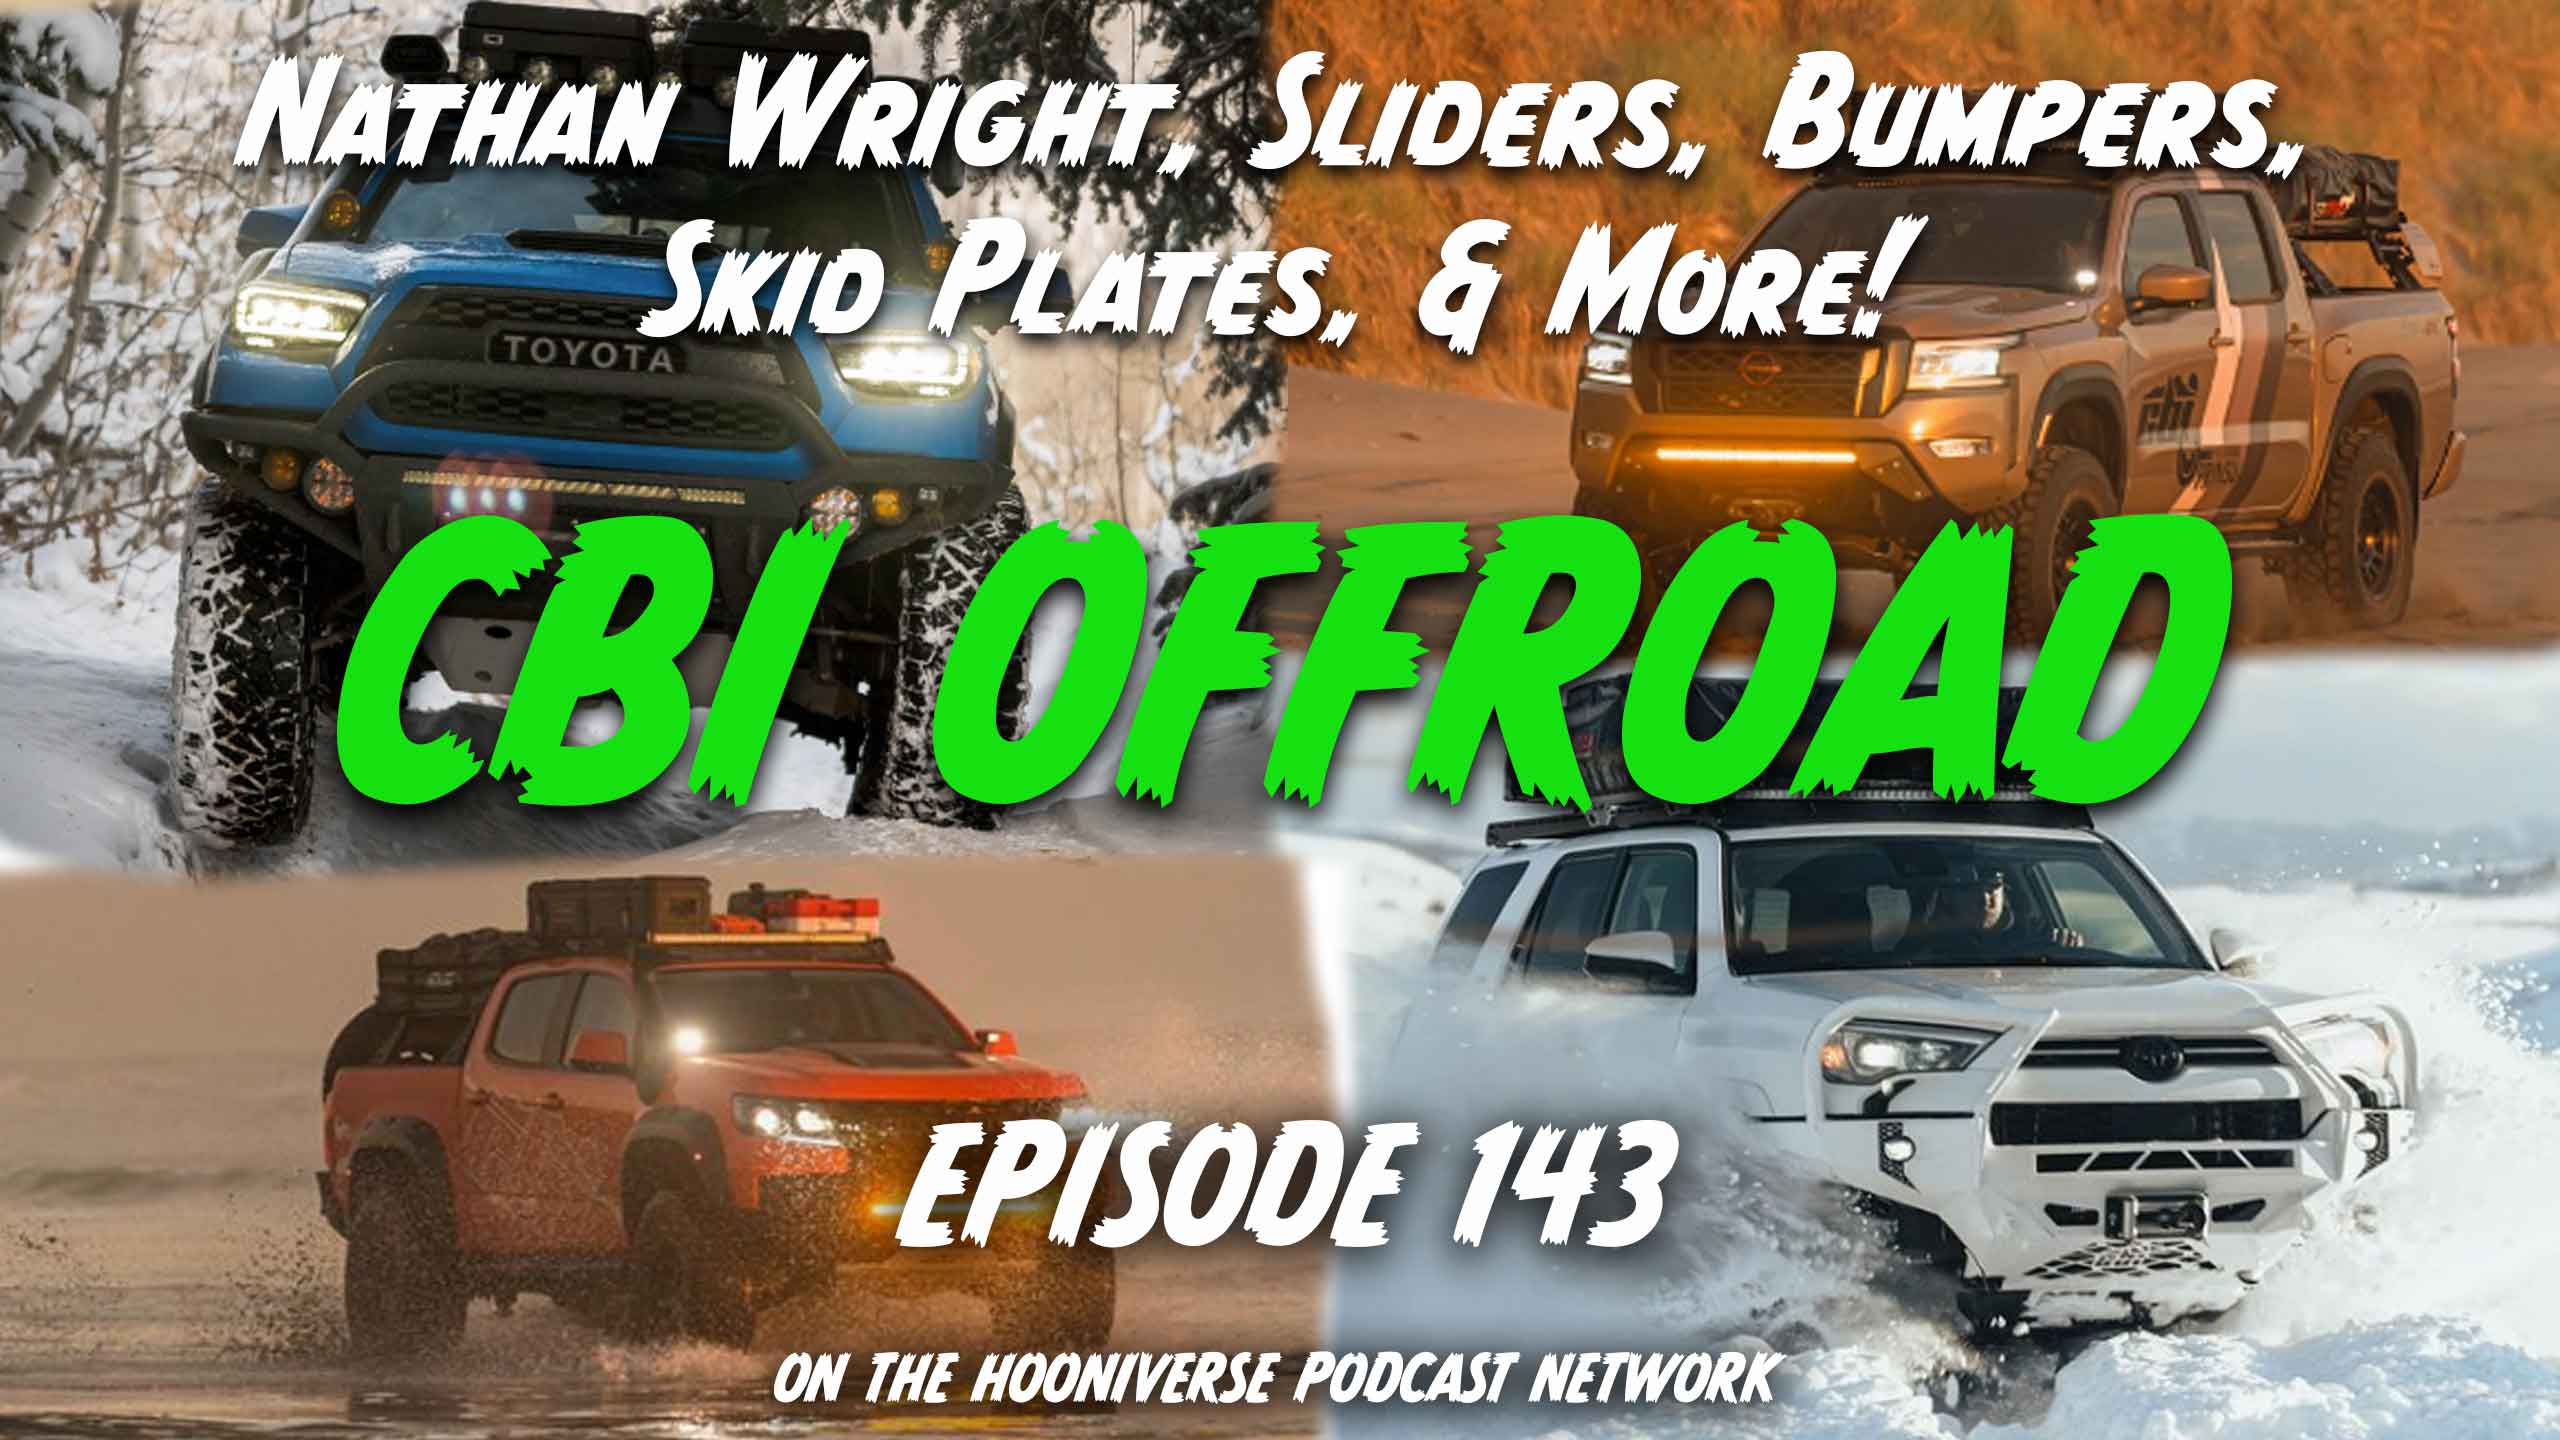 Nathan-Wright-CBI-Offroad-Prinsu-Off-The-Road-Again-Podcast-Episode-143